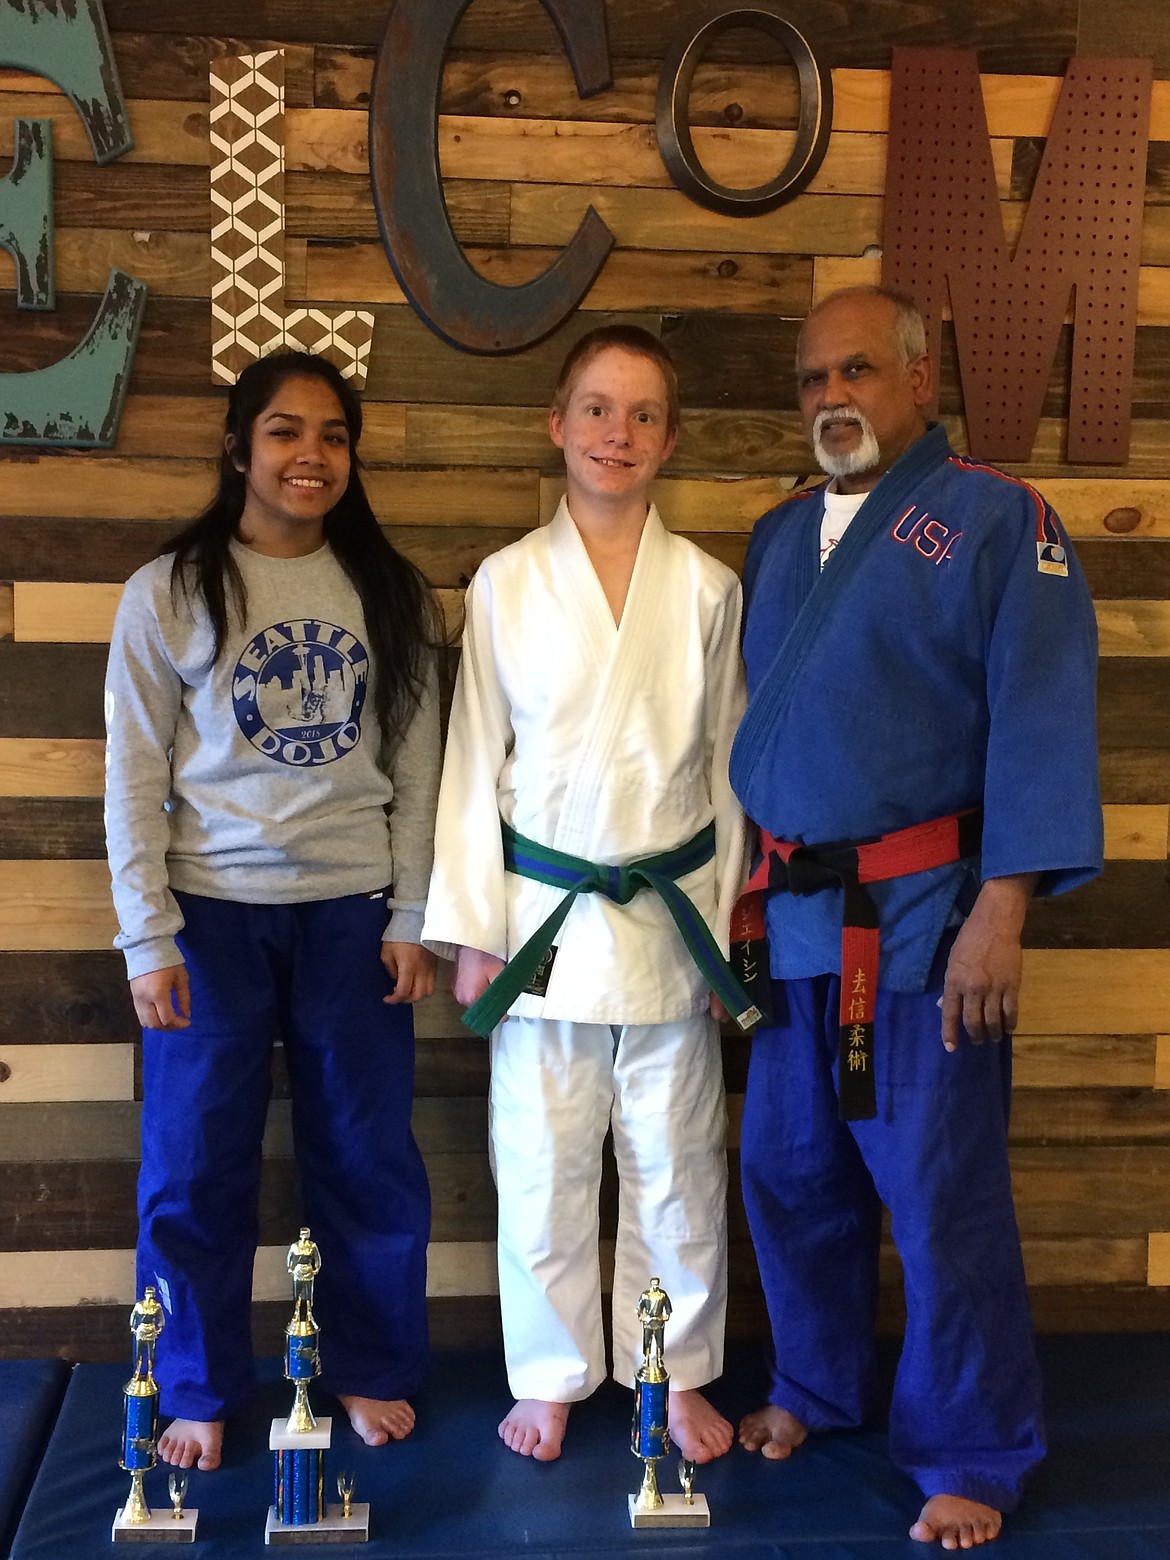 Courtesy photo
Goshinjitsu Martial art school at Forge Fitness in Post Falls competed in Seattle Northwest Judo Championship in Bellevue, Wash., on May 5. Ryan Wood, center, took 2nd place in the boys 11-12 year-old division. Raji Singh, left, took first place in girls 15-16 year-old lightweight division and second place in middleweight division. At right is instructor Bijay Singh.